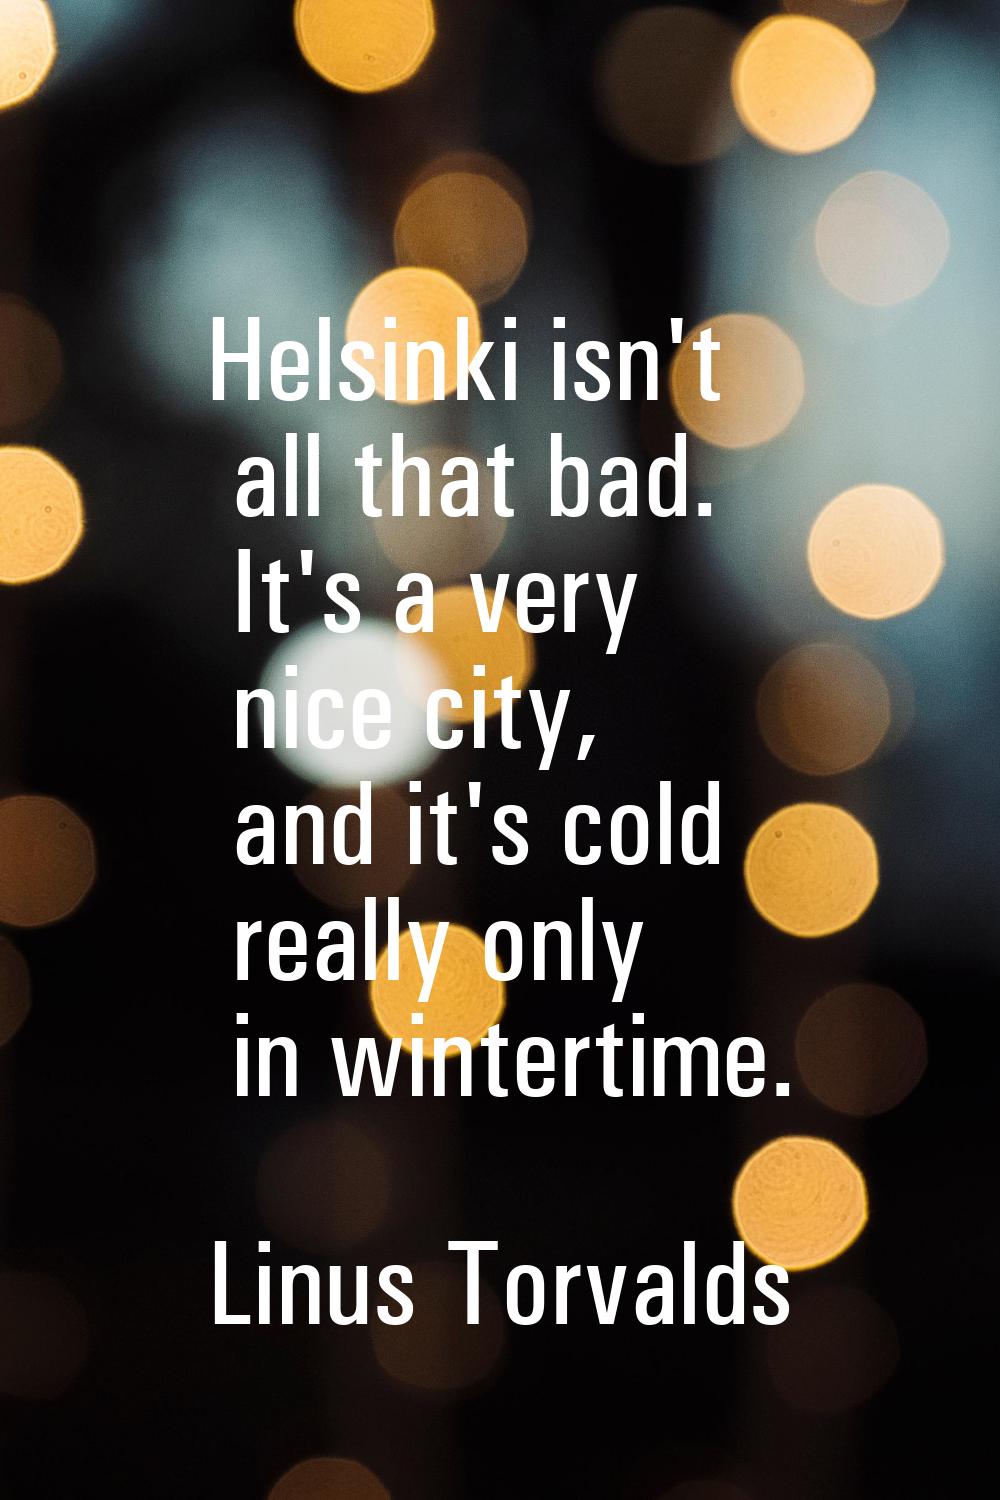 Helsinki isn't all that bad. It's a very nice city, and it's cold really only in wintertime.